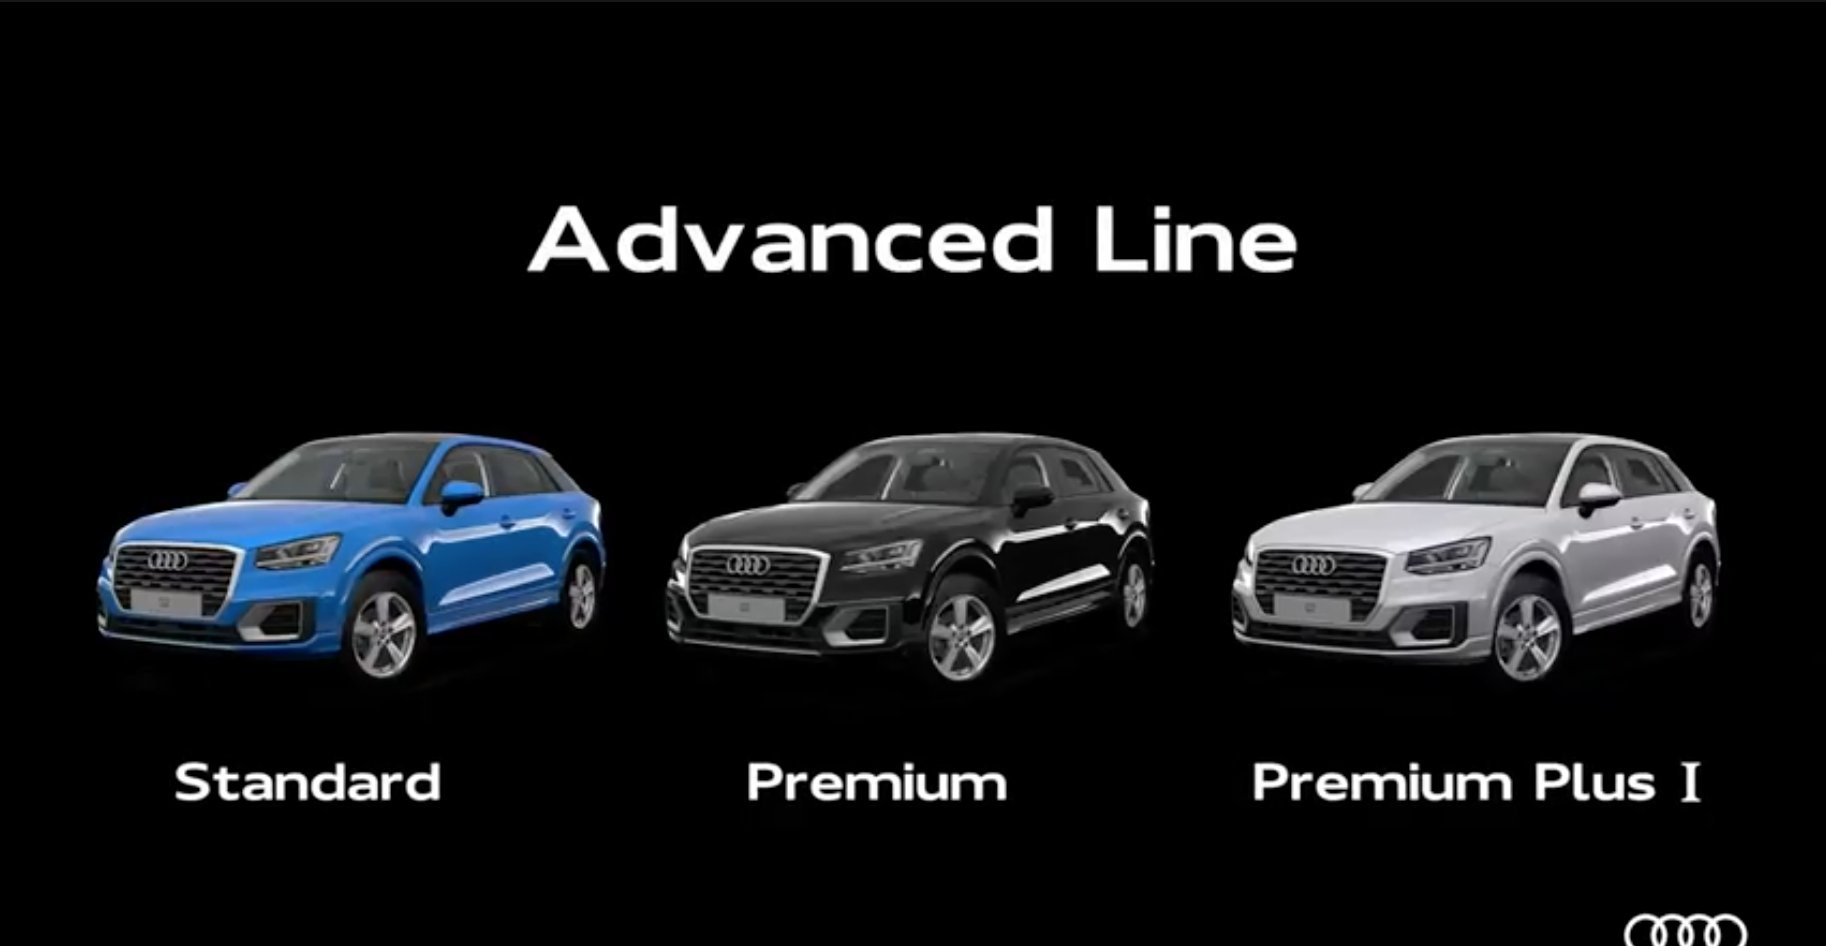 <p>Two broad design packages available for the Audi Q2 - the Advanced Line and Design Line, in five trims.&nbsp;</p>